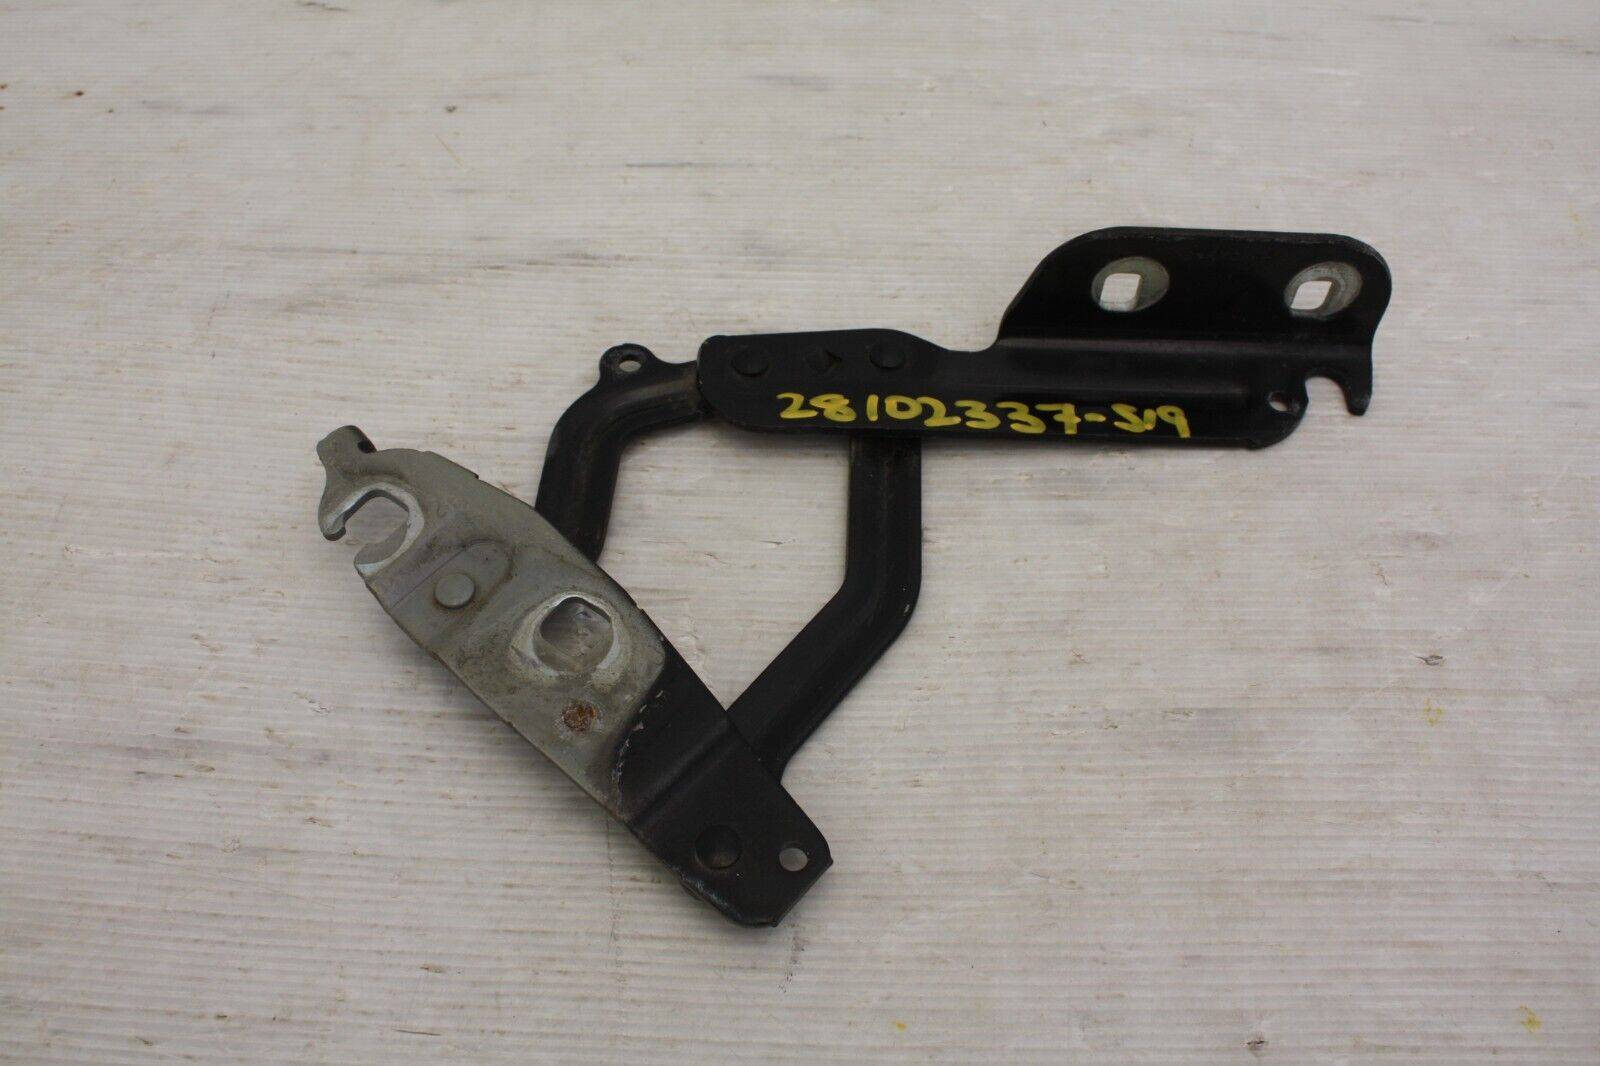 Ford Fiesta Left Side Bonnet Hinge 2008 to 2012 8A61 16801 AD Genuine 175996152432